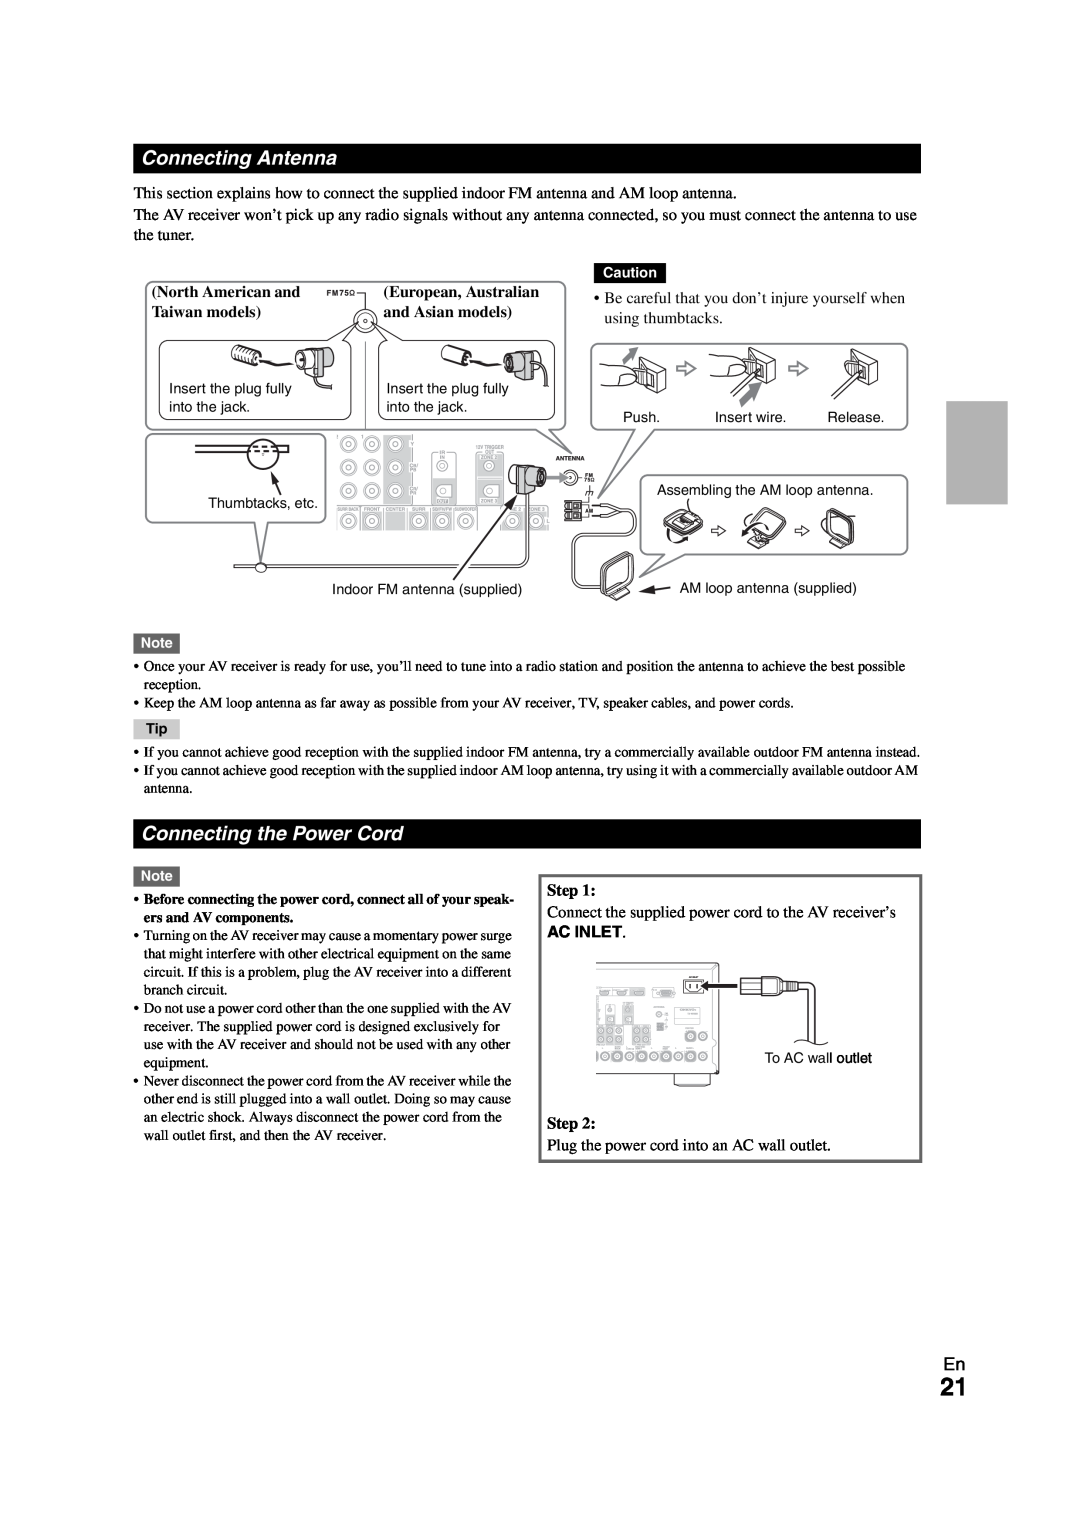 Onkyo TX-NR808 instruction manual Connecting Antenna, Connecting the Power Cord, Ac Inlet 